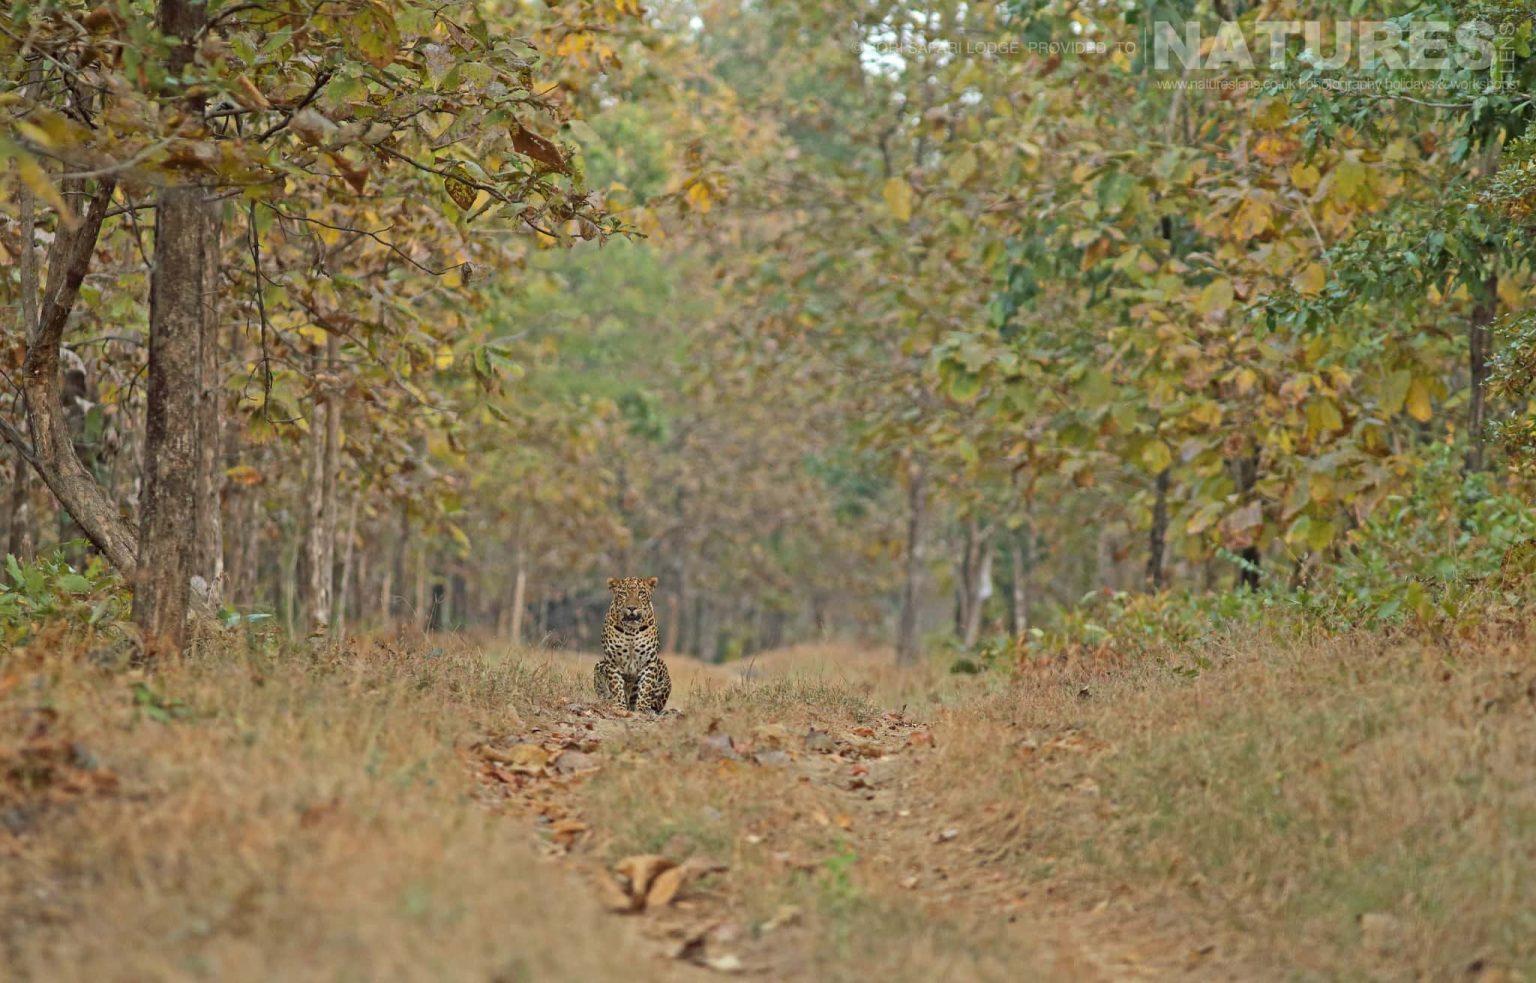 A leopard photographed within Bori Wildlife Reserve - one of the locations used during the NaturesLens Wildlife of Madhya Pradesh photography  holiday